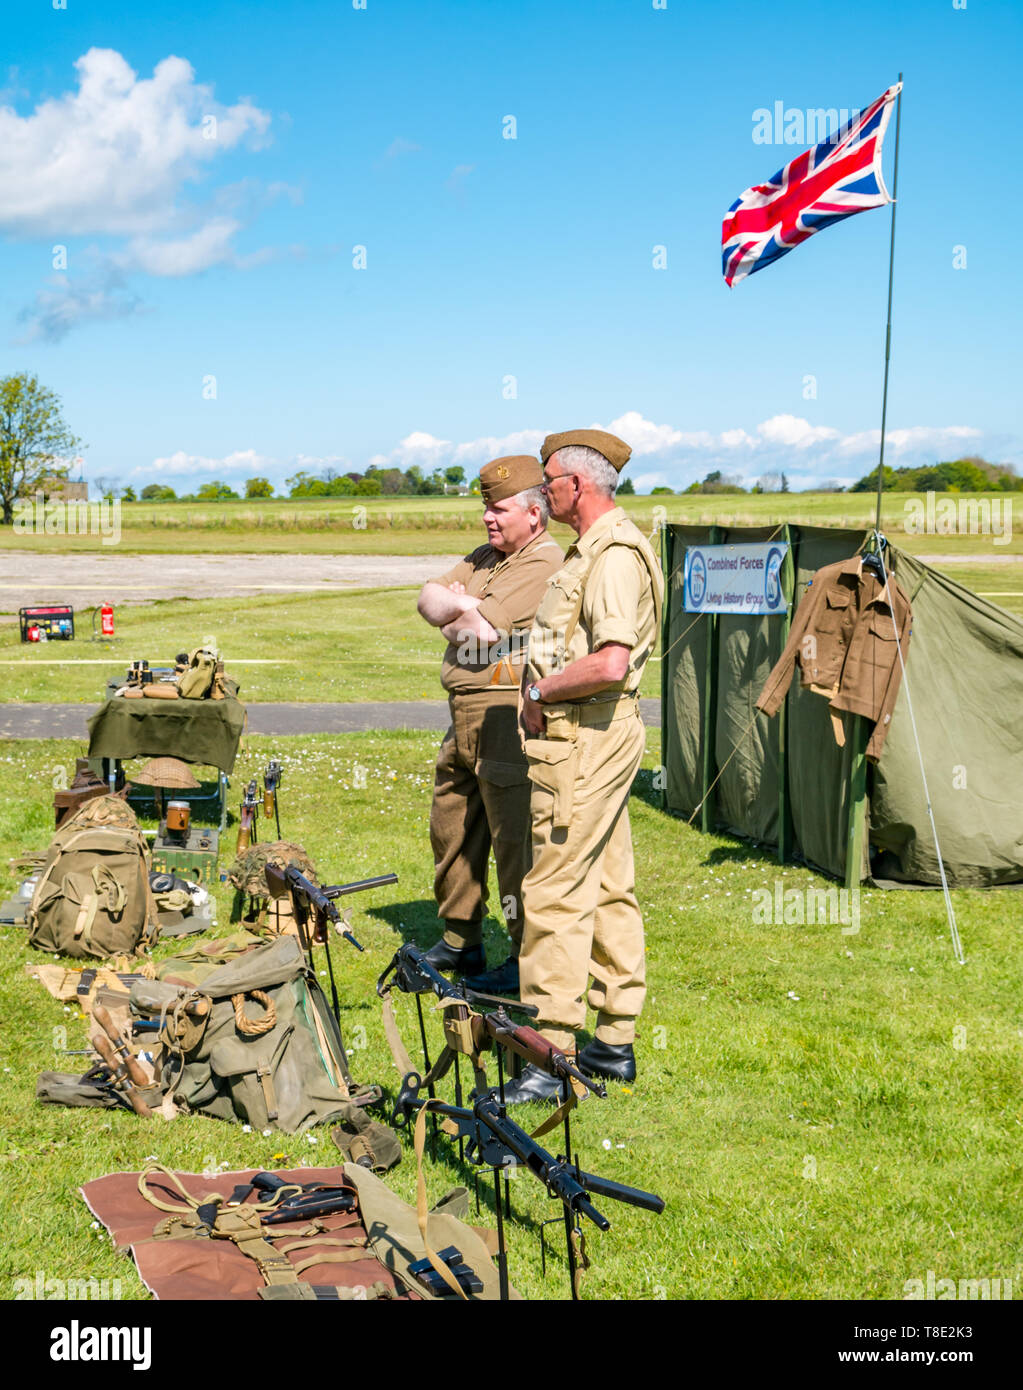 Museum of Flight, East Fortune, East Lothian, Scotland, UK 12th May, 2019. Wartime Experience: A family day out with all things related to the World Wars. Men dressed in second world war uniforms with a display of British military equipment and a Union Jack flag Stock Photo